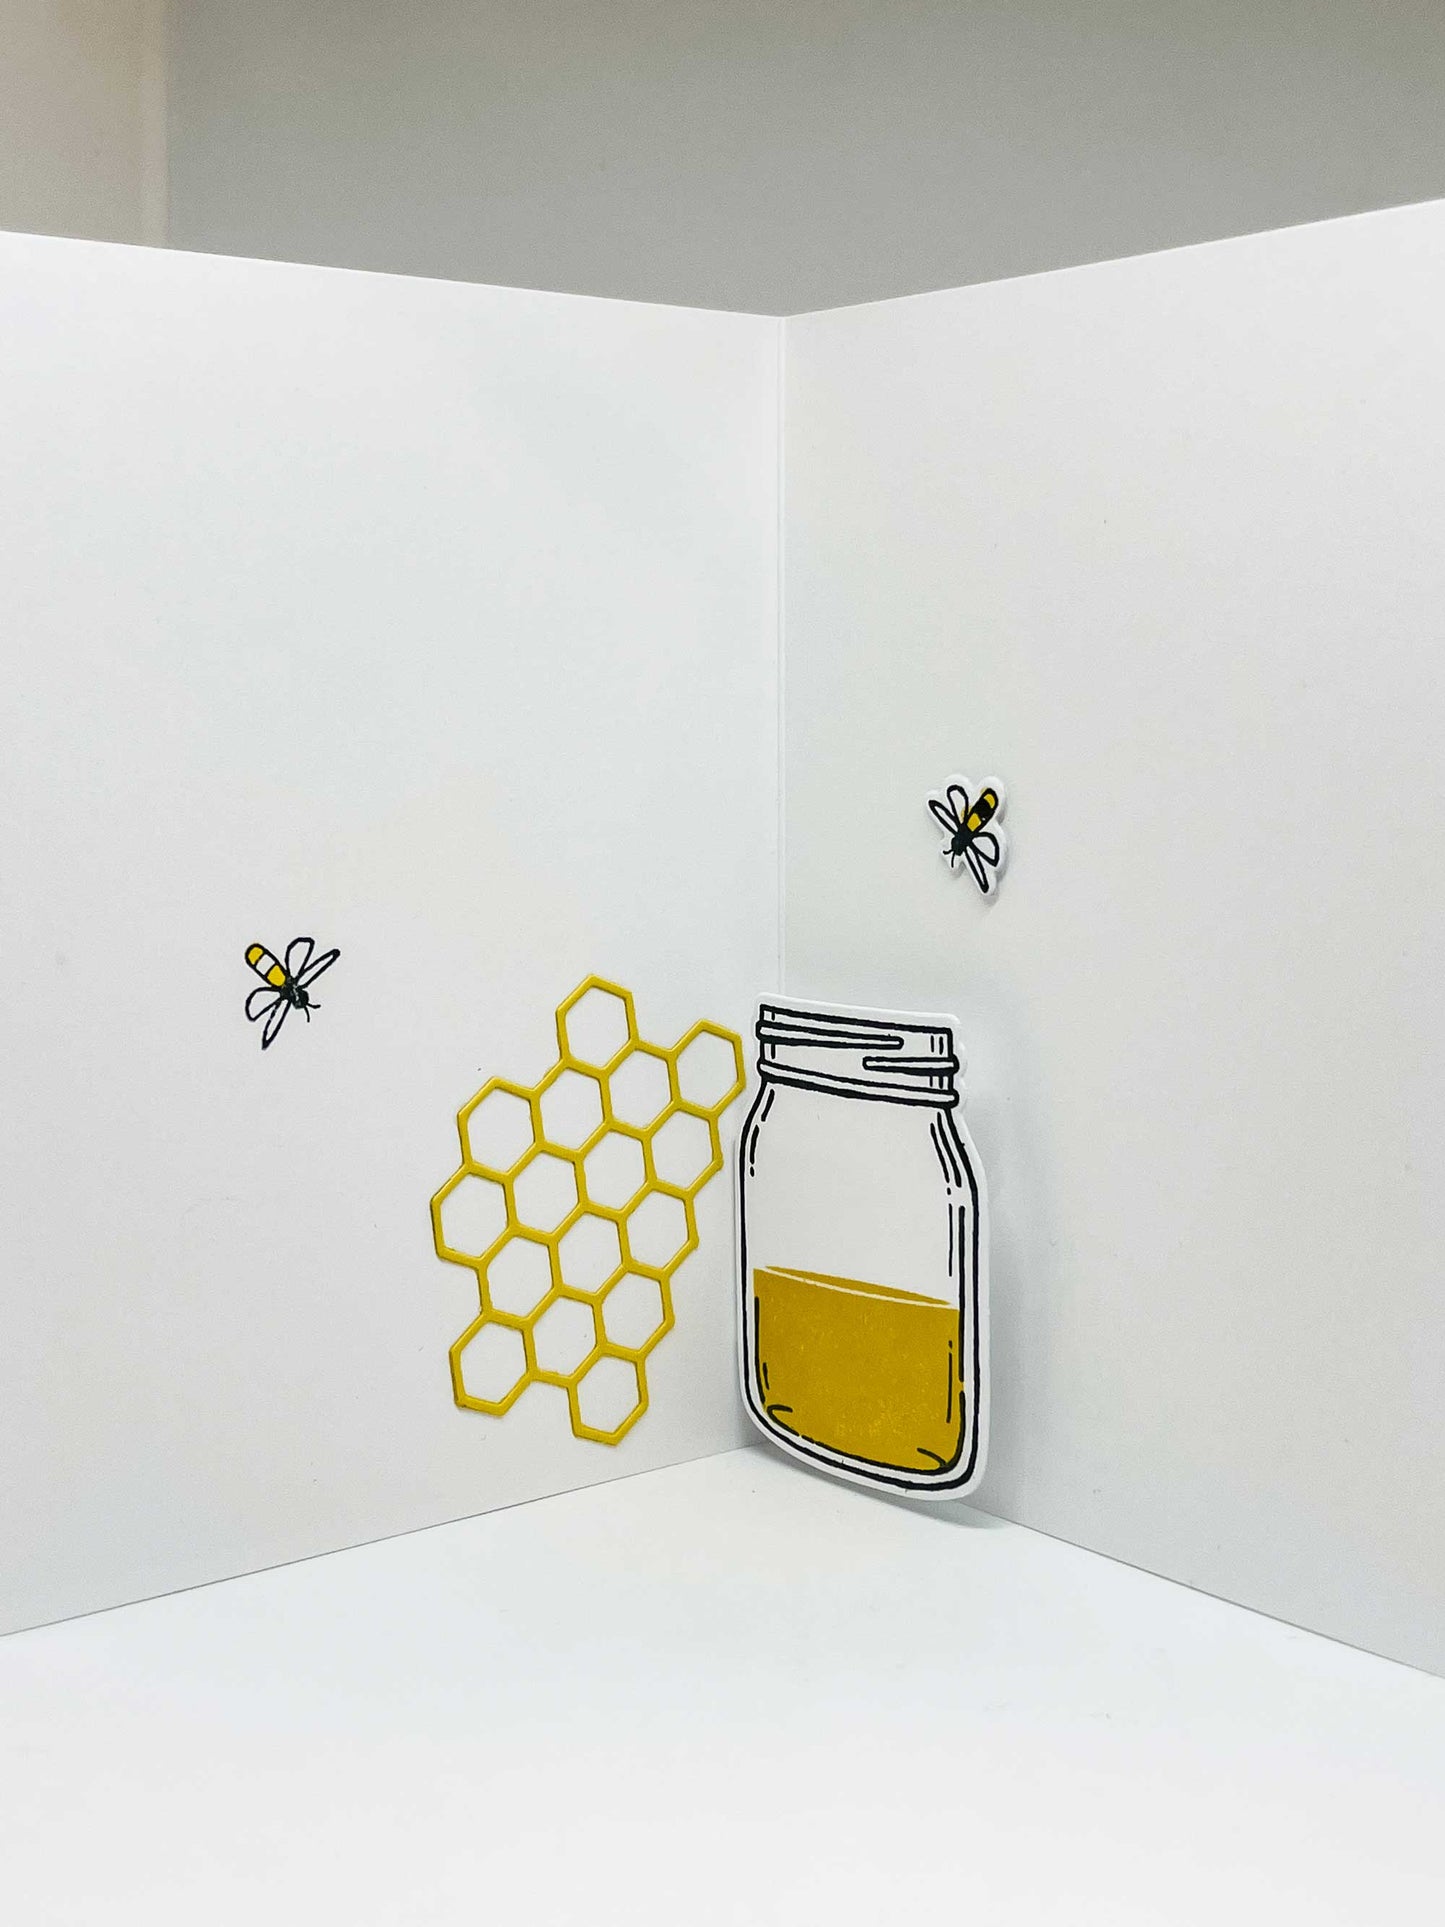 Pop-up greeting card with honey jar, honeycomb and honeybees